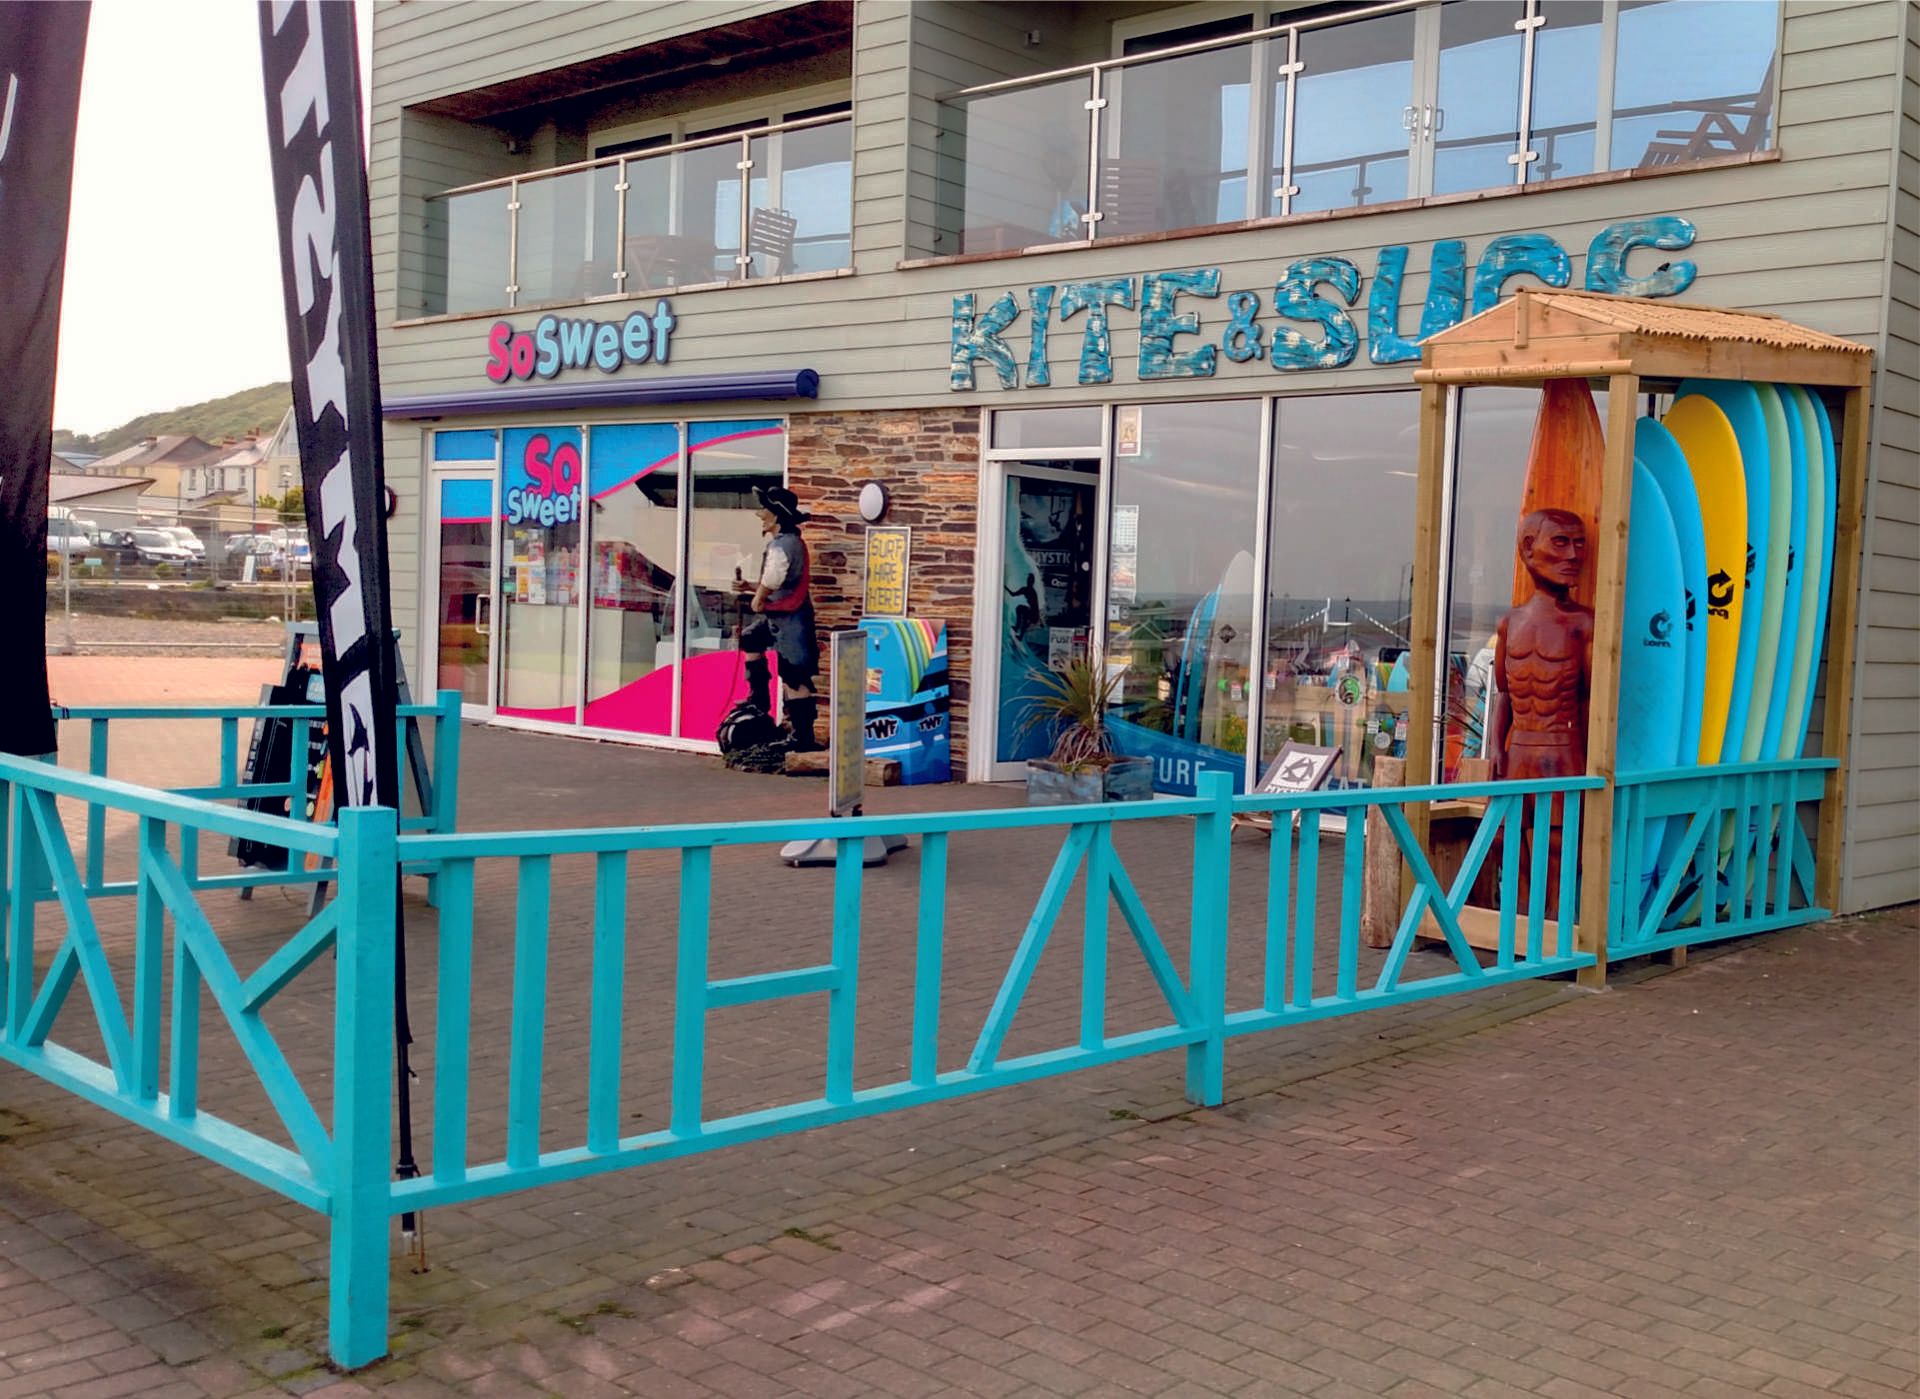 Kitemare-Surf and kite shop on the village green in Westward Ho!